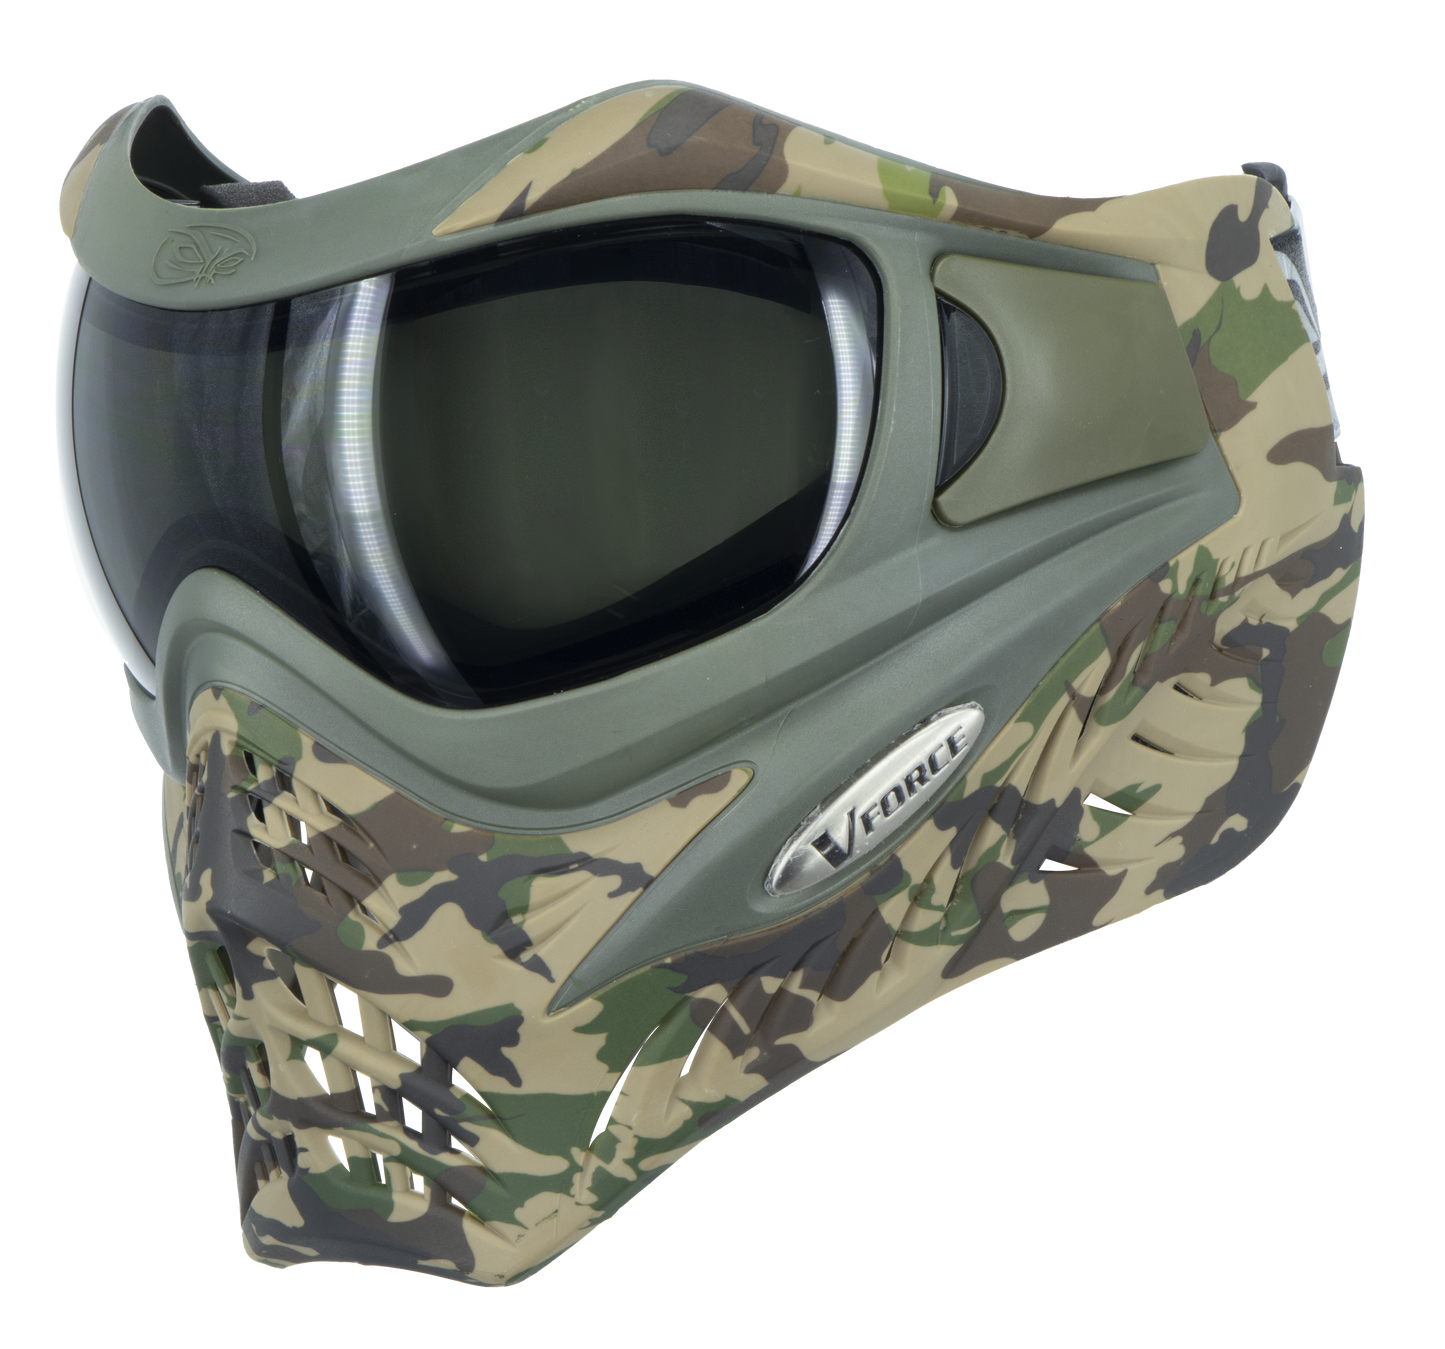 V-Force Grill SE Paintball Mask Goggle - Woodlands Camo w/ Smoke & Clear Lens